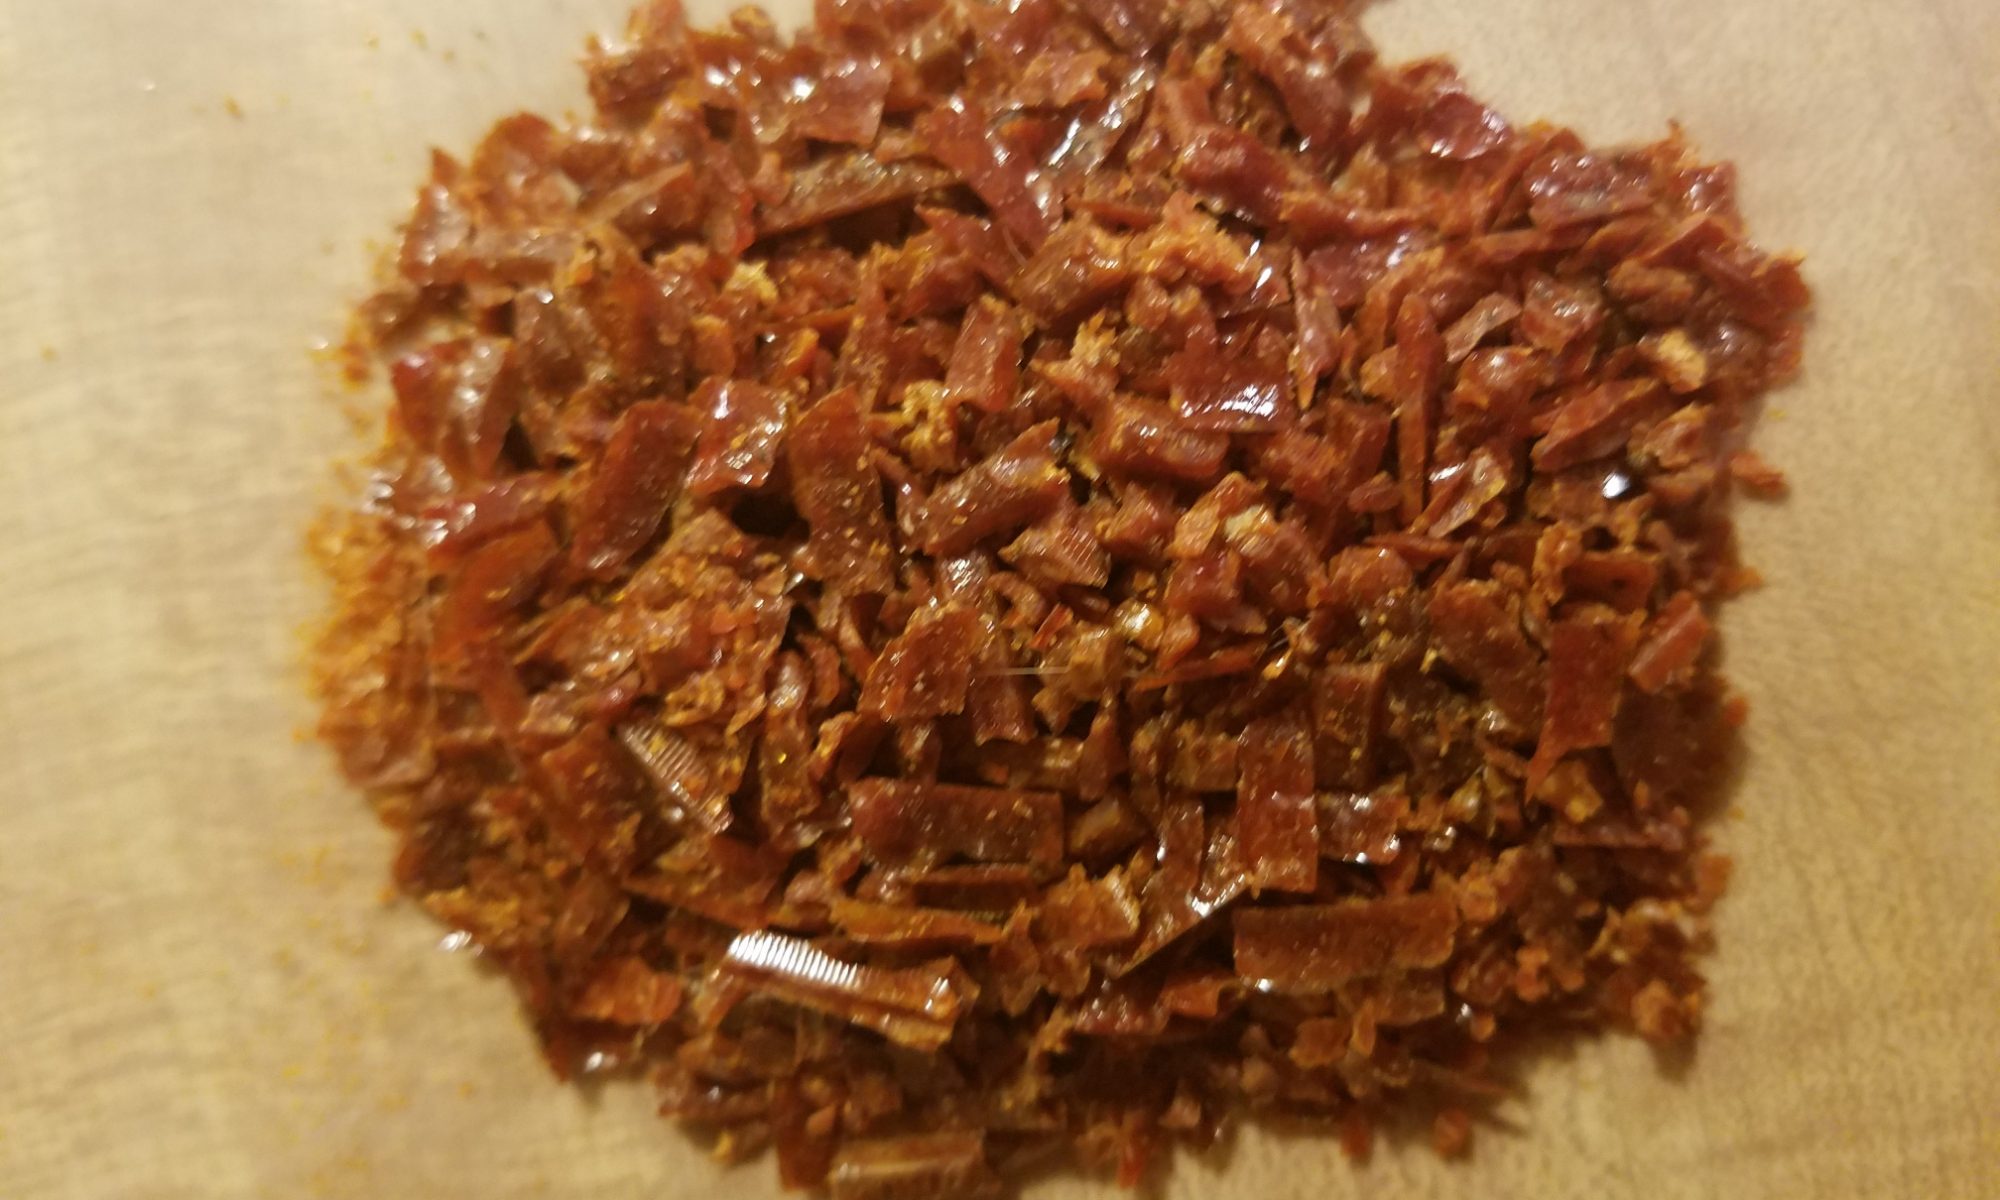 7-12-2017 A pile of propolis collected, crumbled, and ready for use.